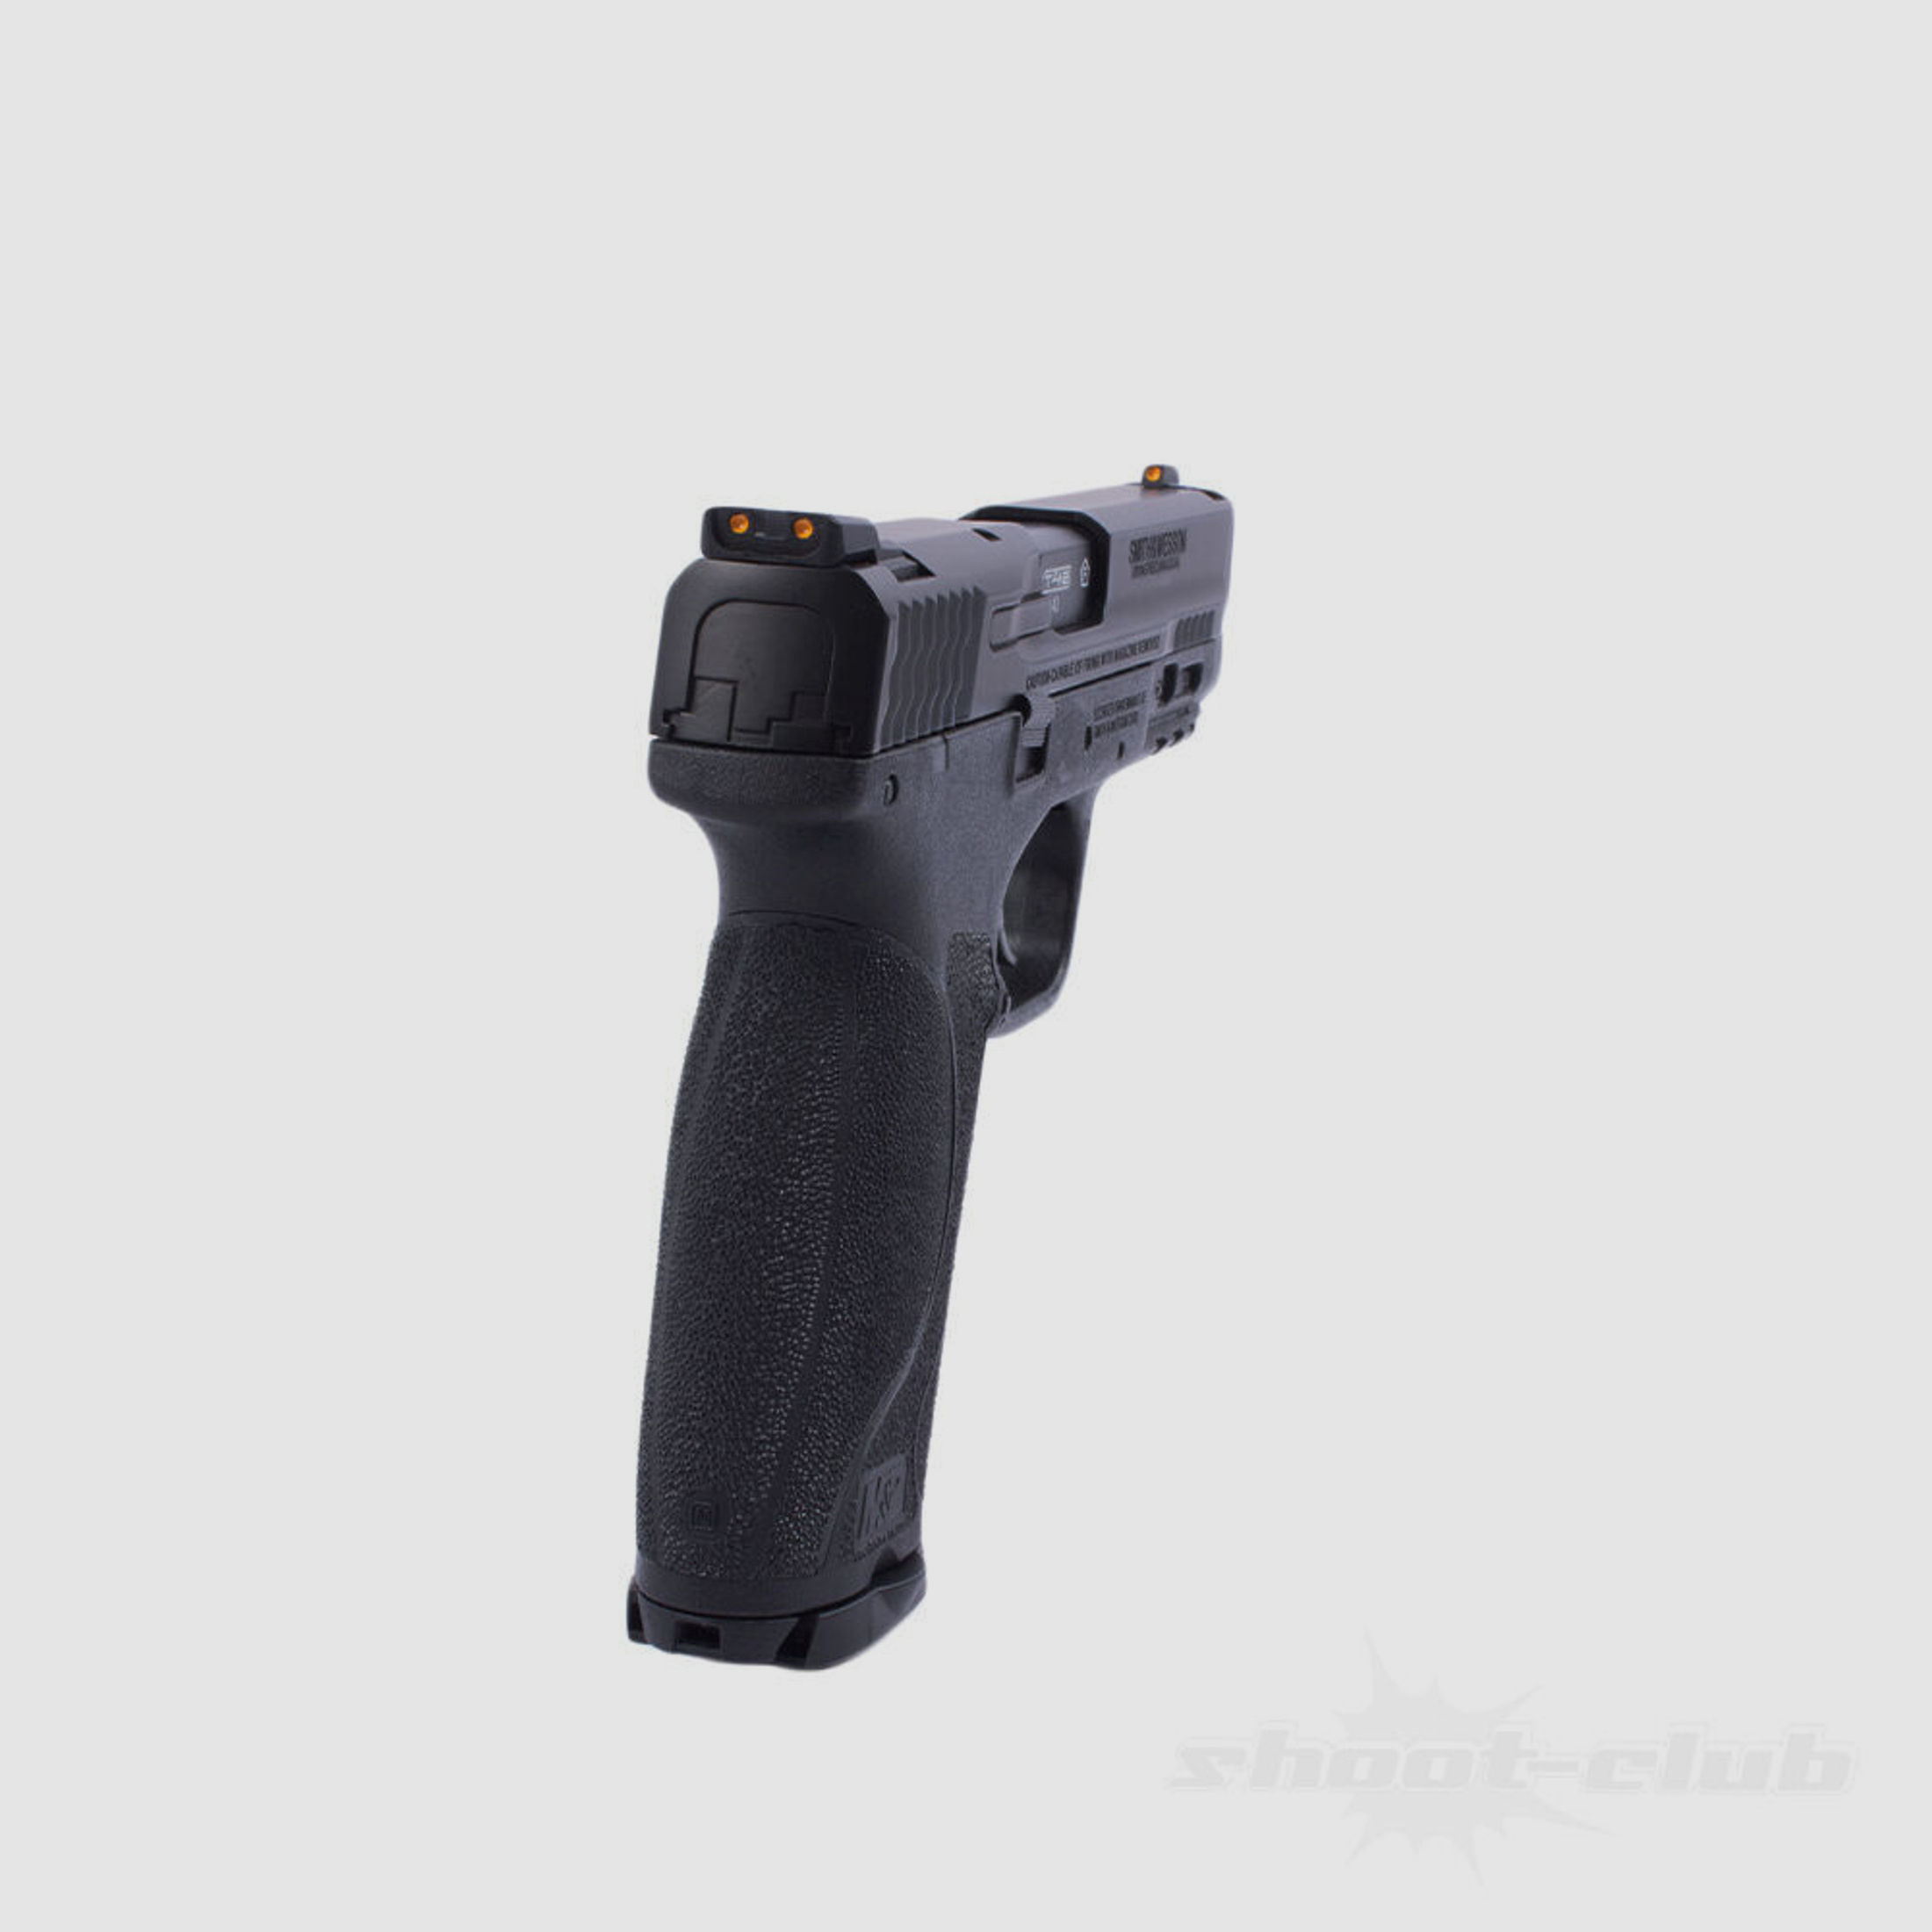 SMITH & WESSON M&P9 2.0 T4E CO2 RAM Markierer .43